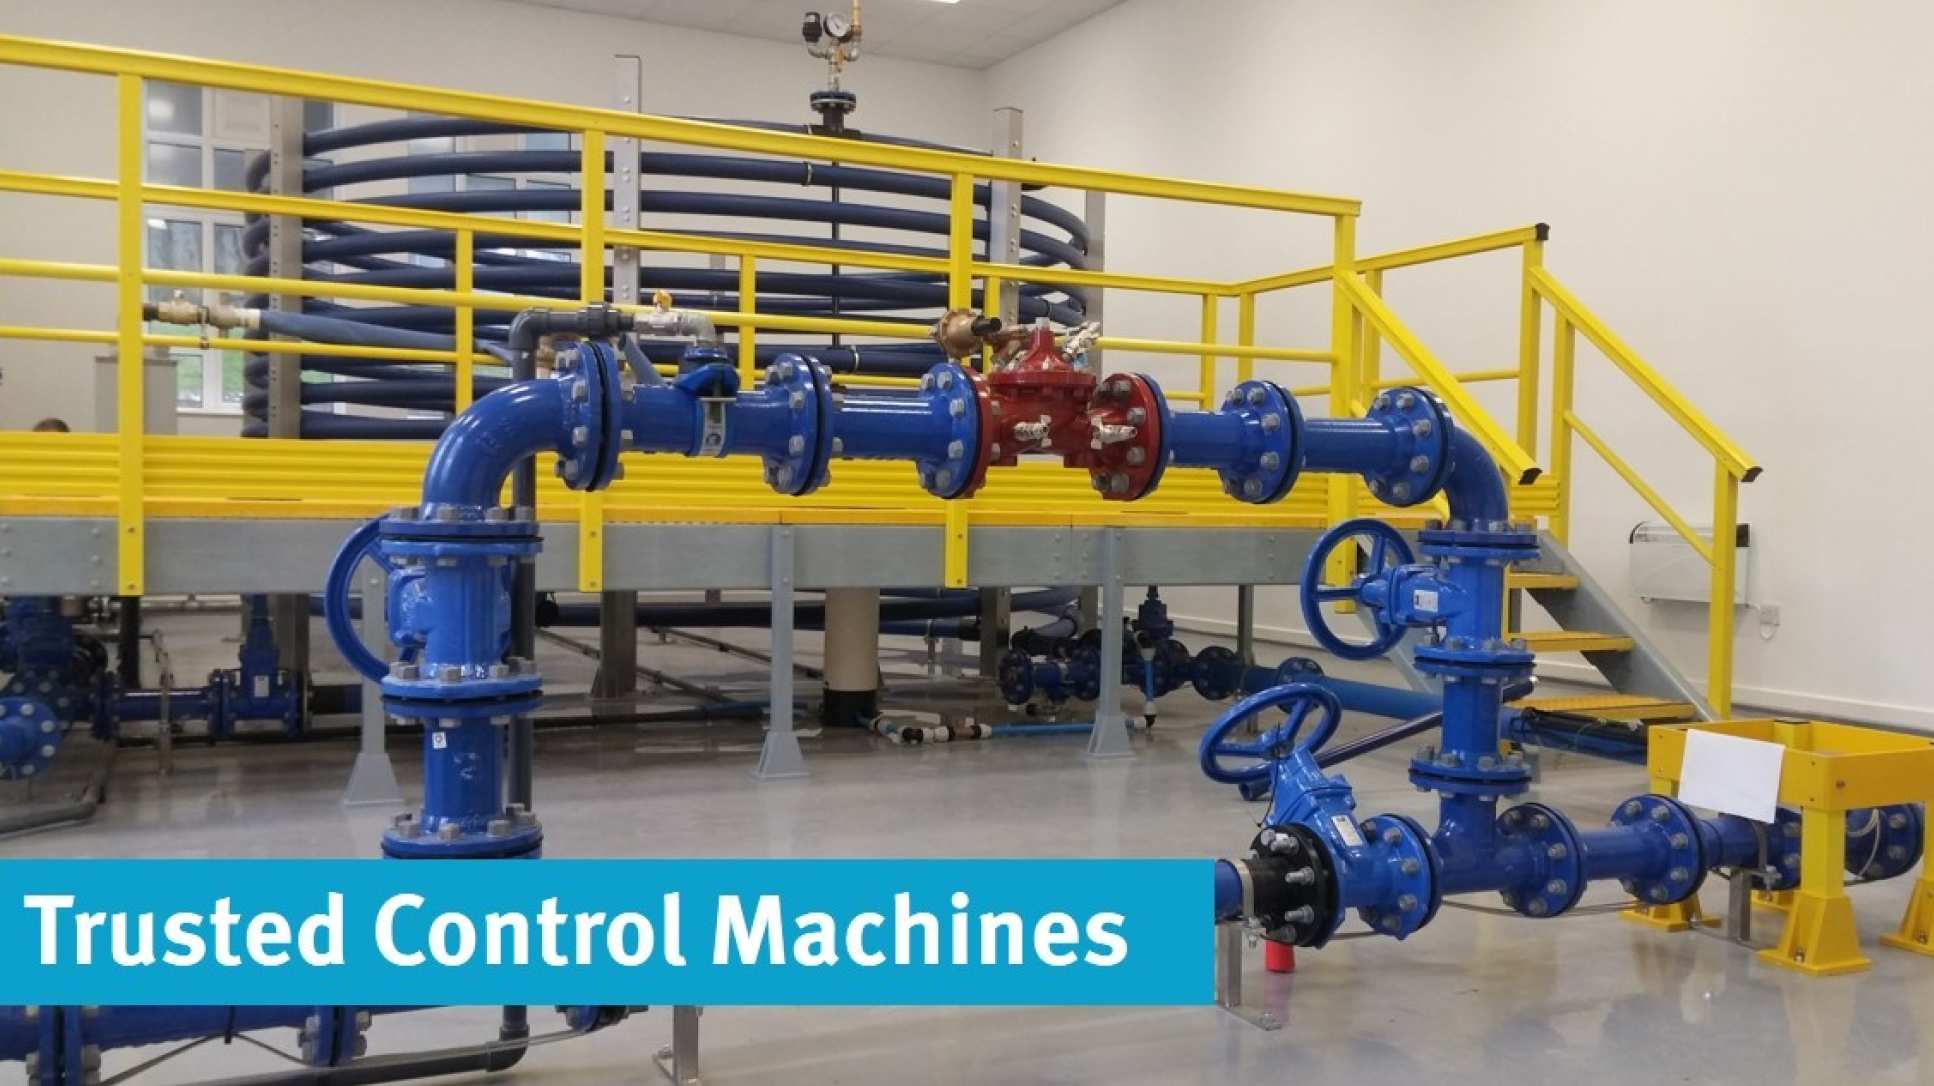 Trusted Control Machines